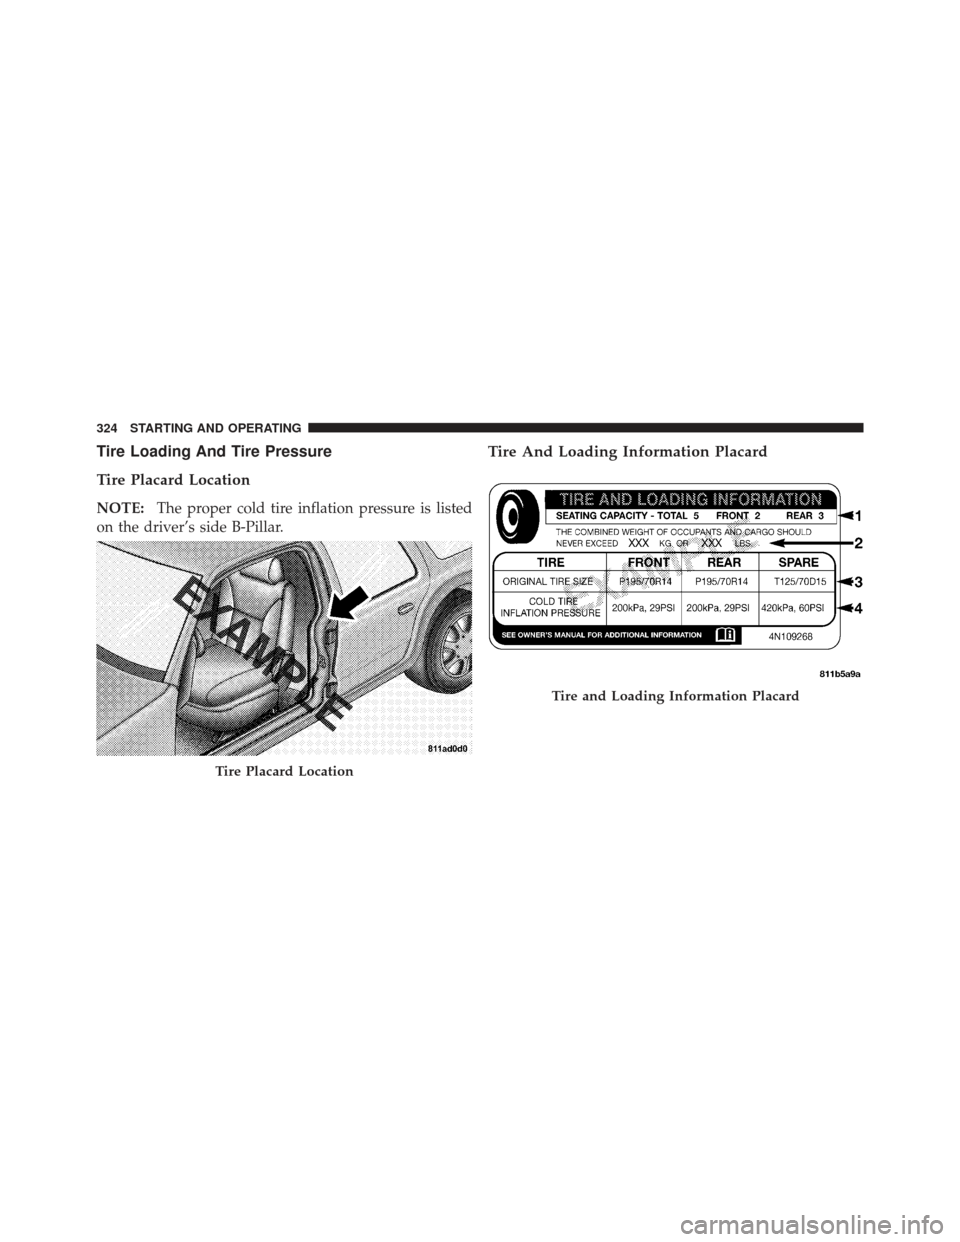 JEEP COMPASS 2011 1.G Owners Manual Tire Loading And Tire Pressure
Tire Placard Location
NOTE:The proper cold tire inflation pressure is listed
on the driver’s side B-Pillar.
Tire And Loading Information Placard
Tire Placard Location
